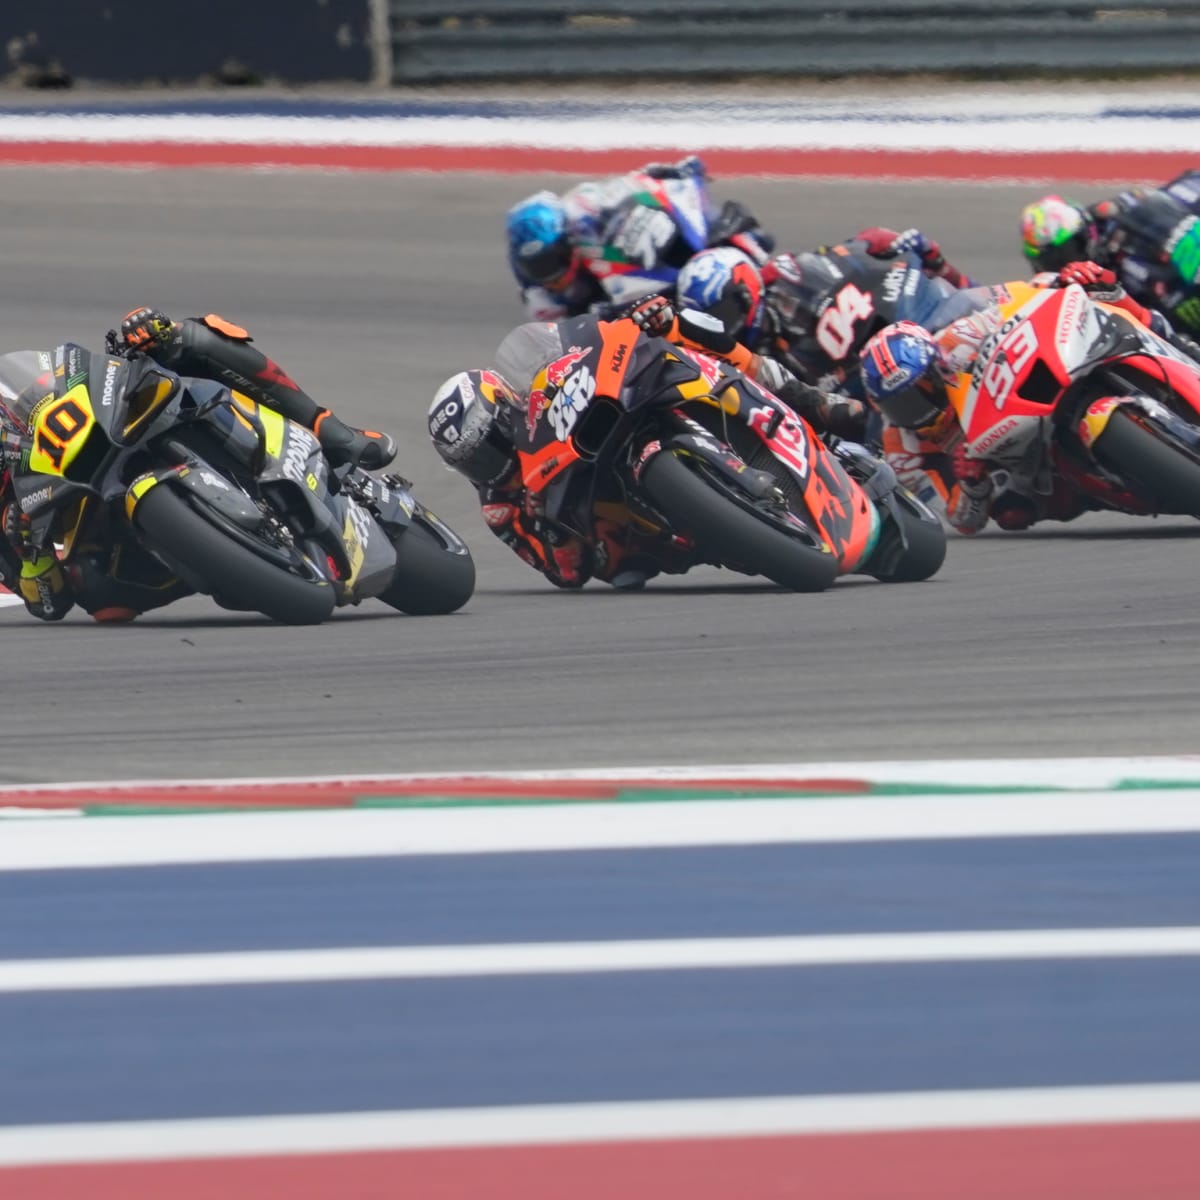 Will MotoGP follow F1 to have more races in America? - Auto Racing